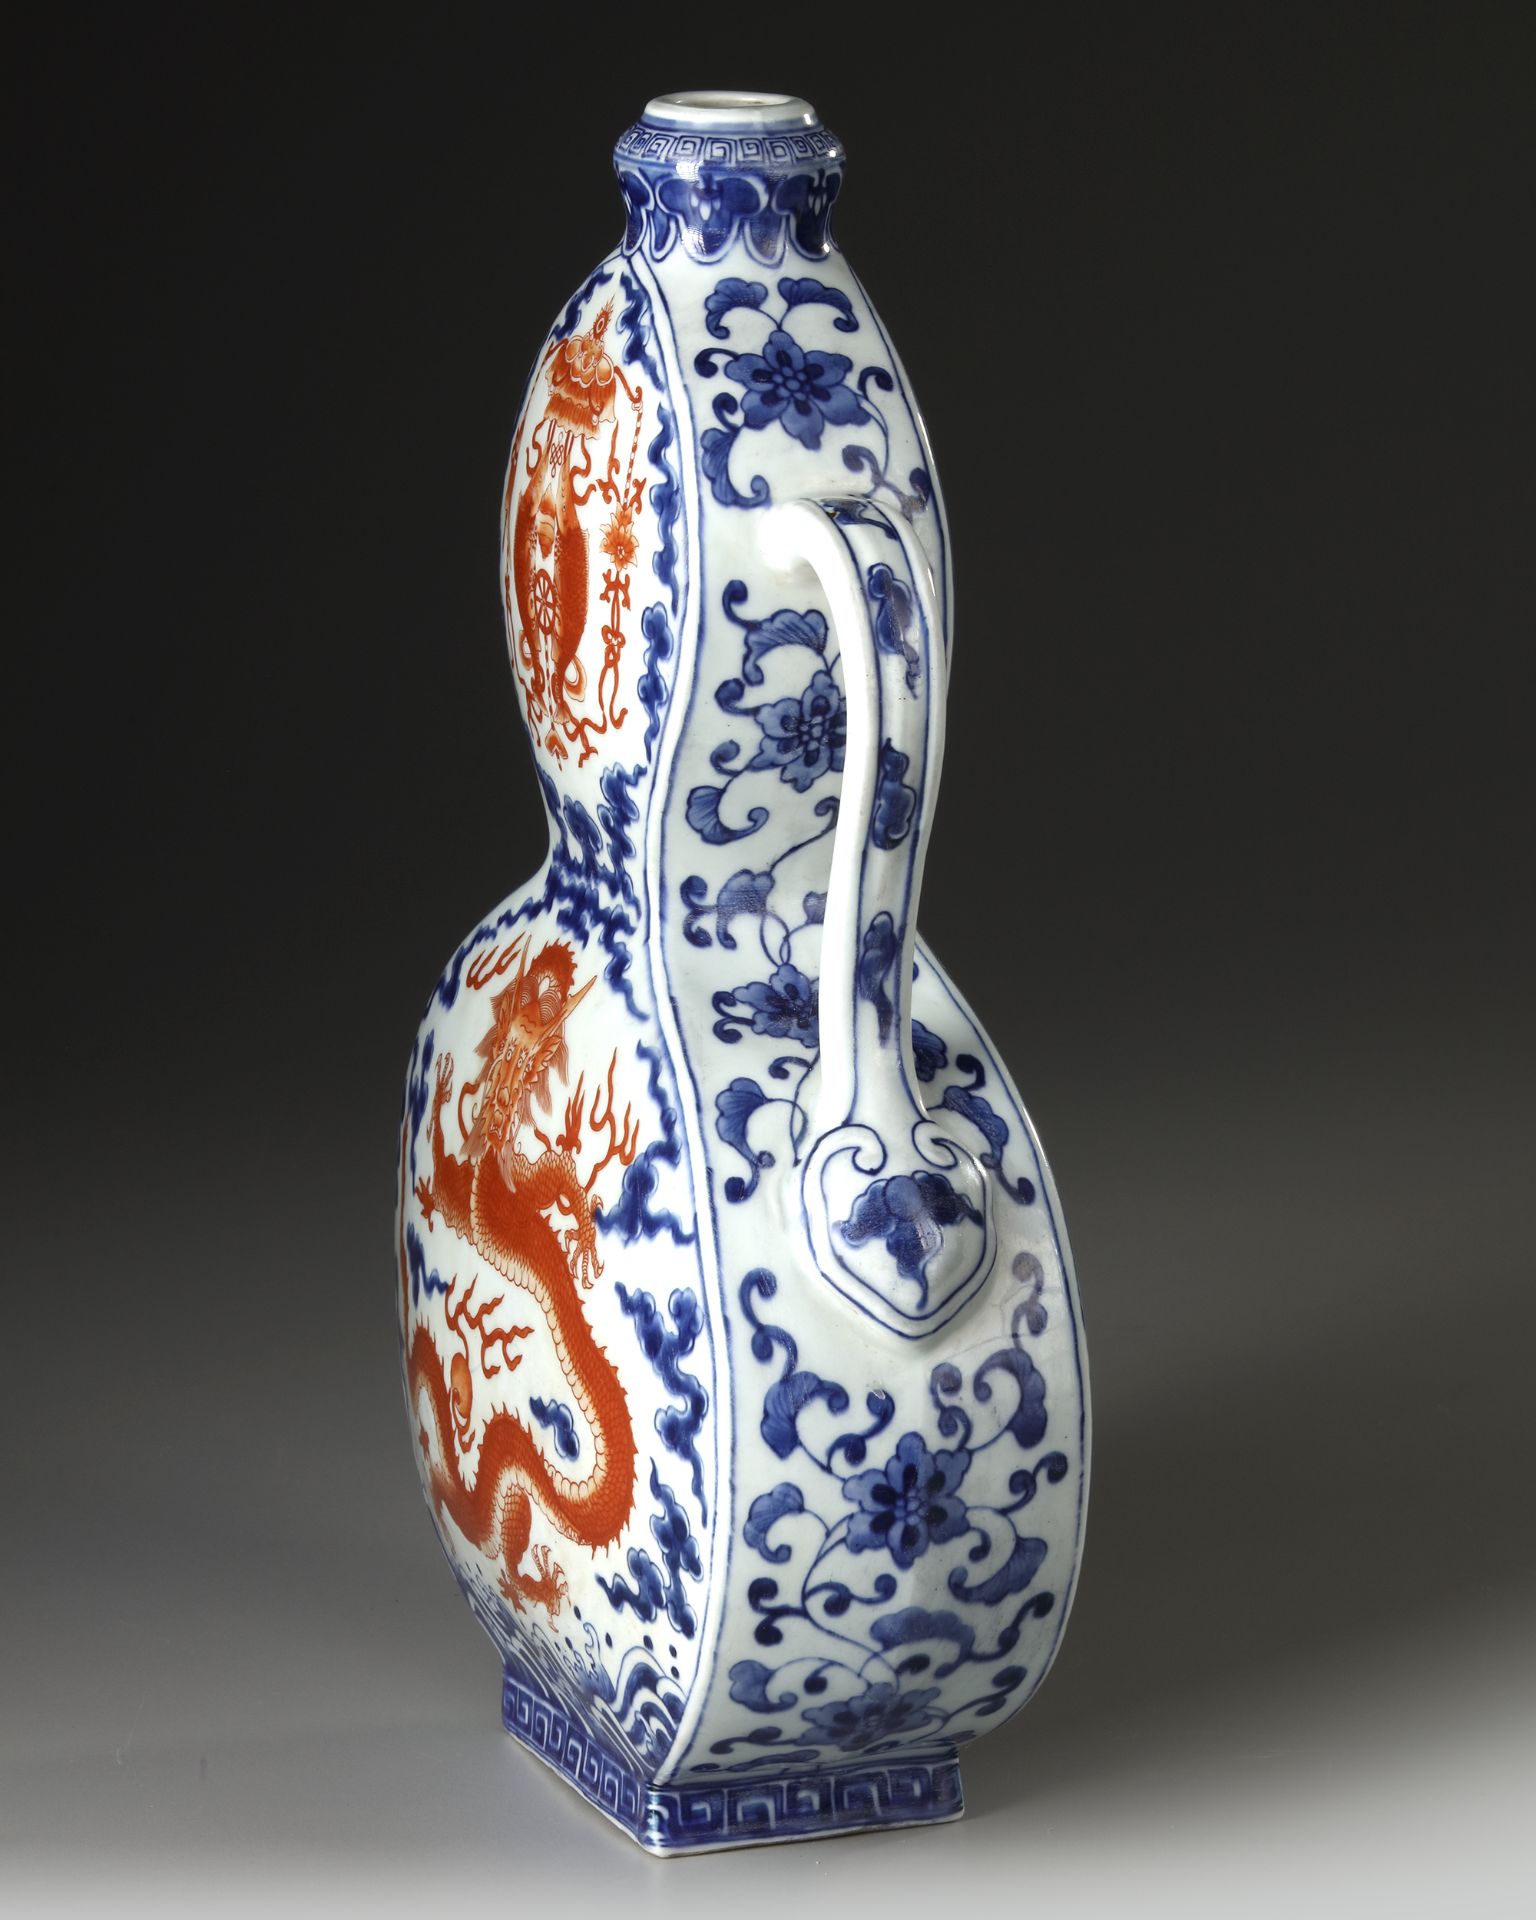 A CHINESE IRON-RED DECORATED DOUBLE GOURD MOON FLASK, 19TH-20TH CENTURY - Image 3 of 3